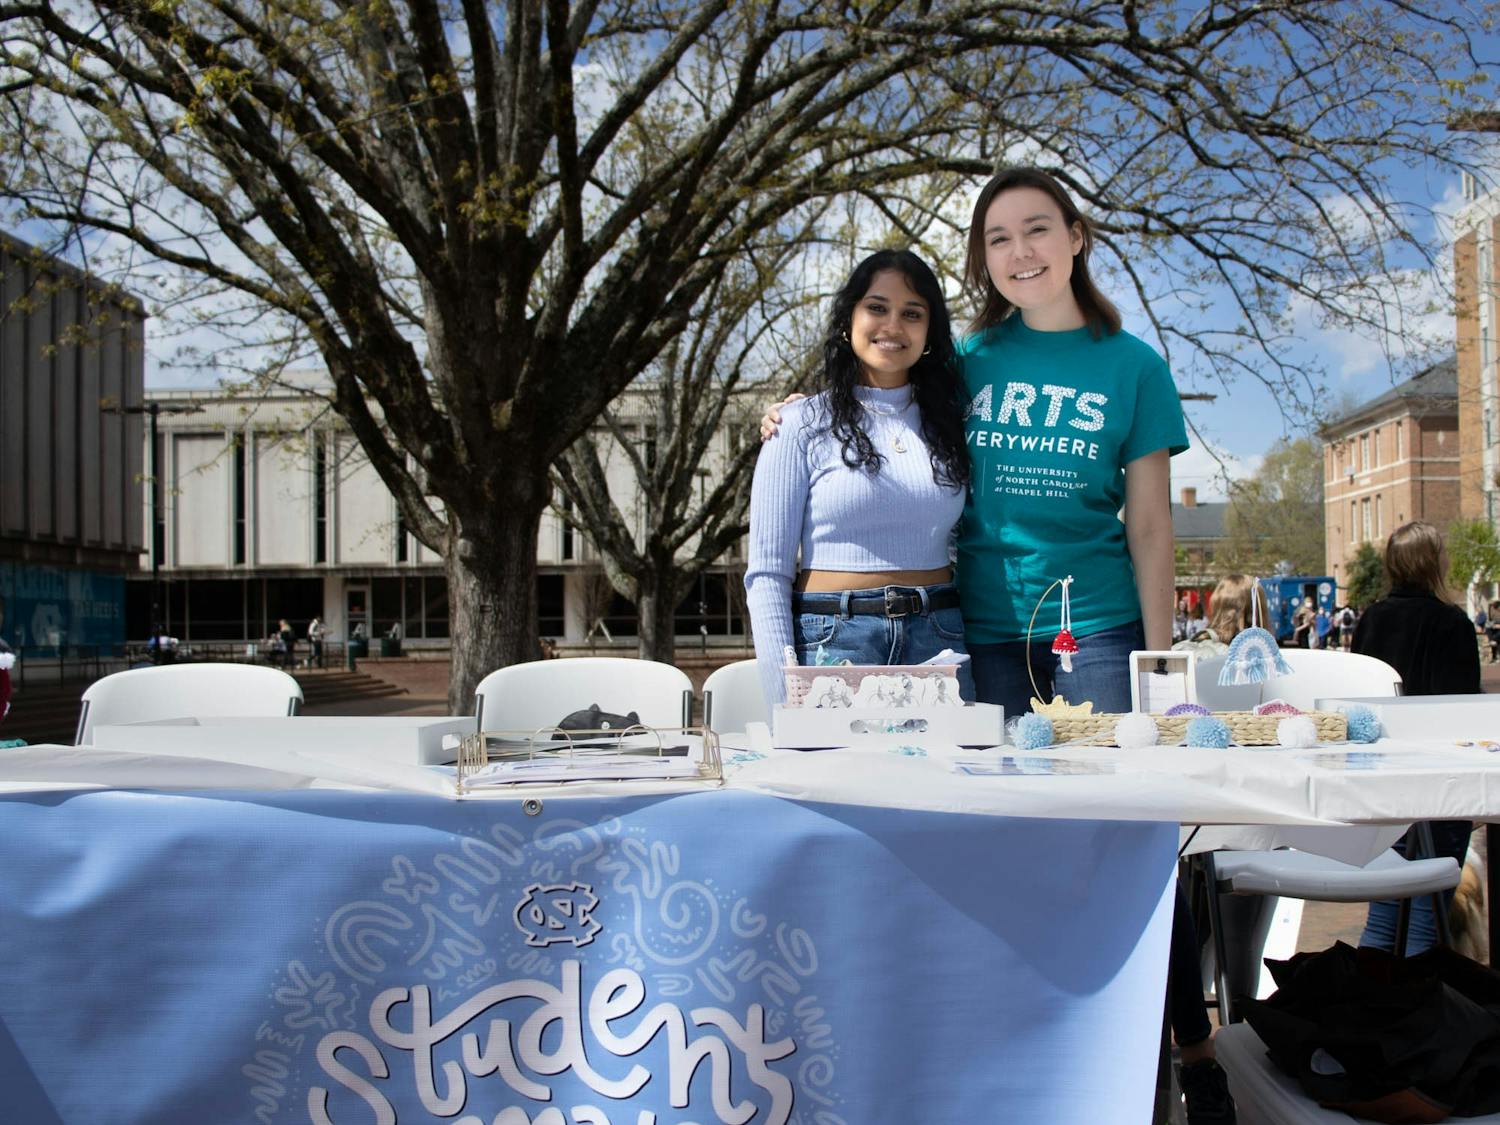 Freshmen Natalie Bradin and Shreya Gundam man the UNC StudentMade Pop Up Shop in the Pit on Arts Everywhere Day on Friday, April 8, 2022.